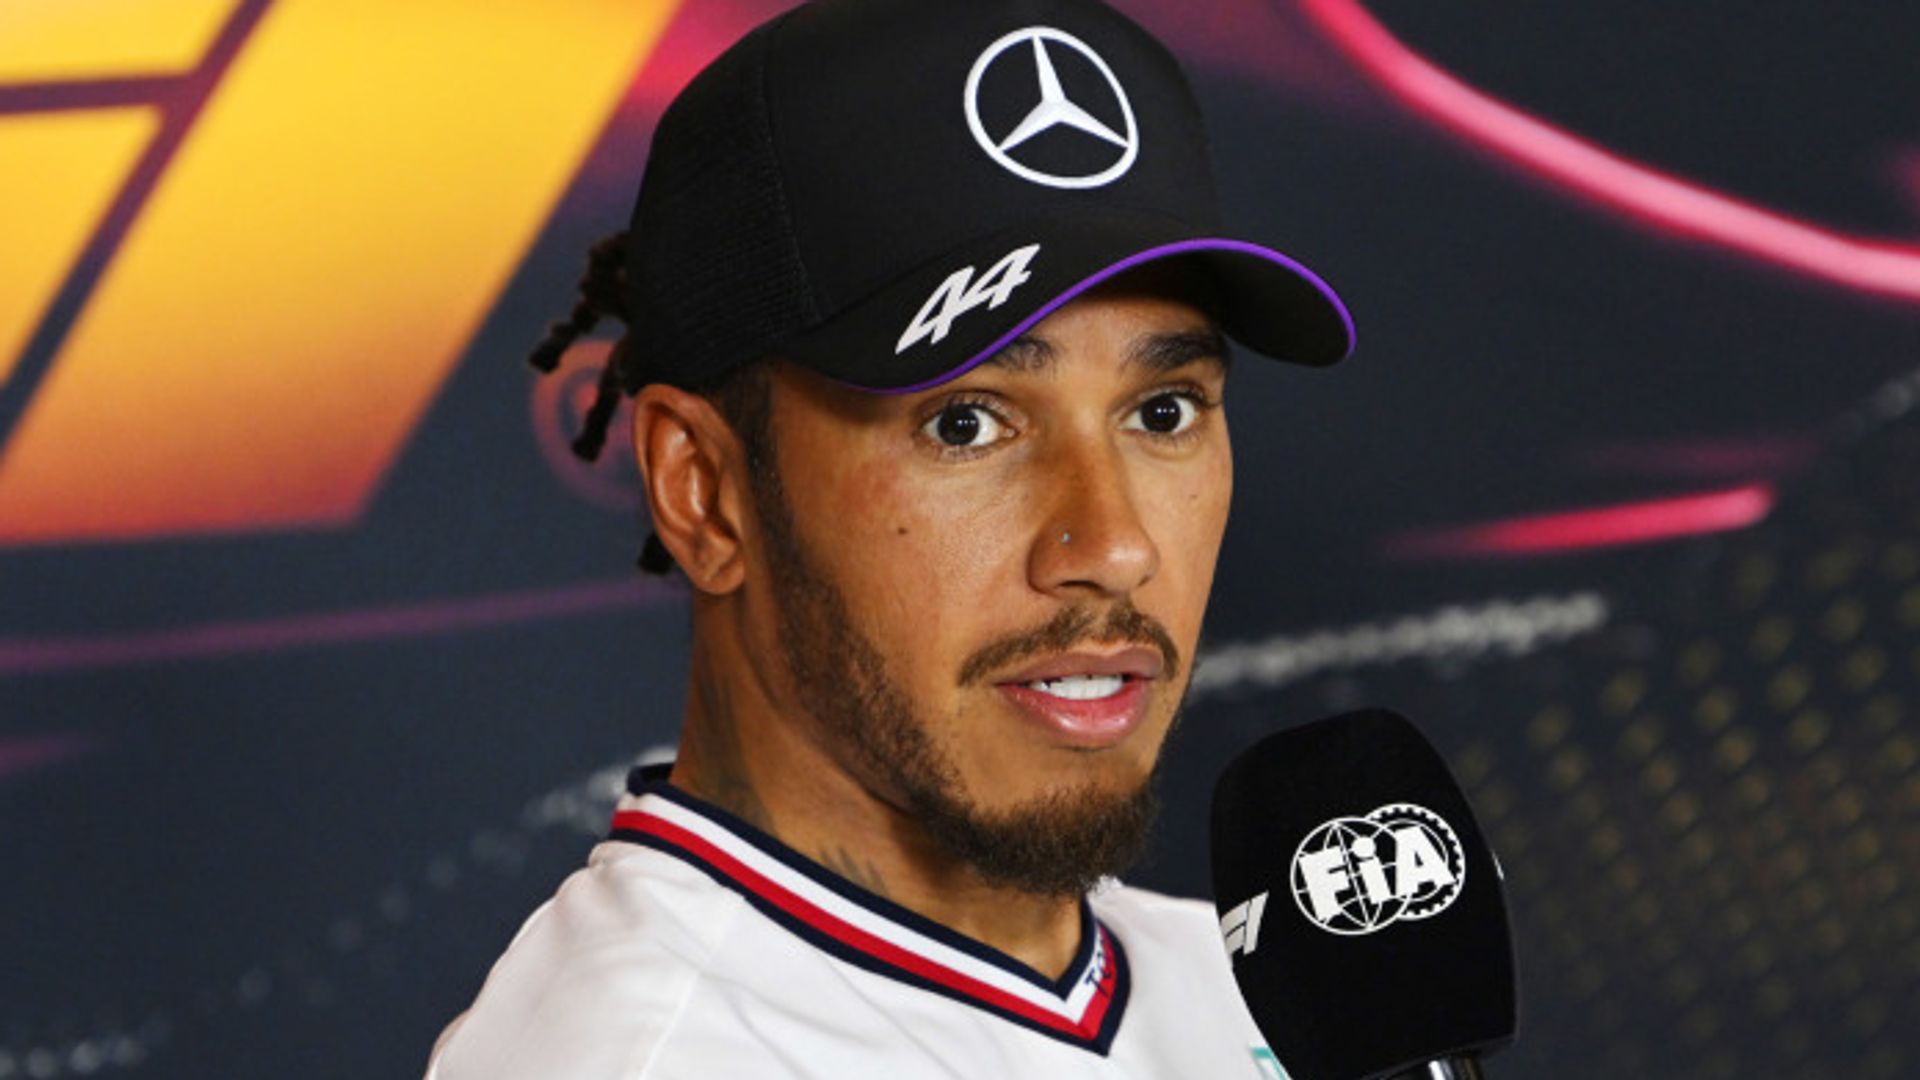 Hamilton: I didn't think Mercedes could get any worse, but it did